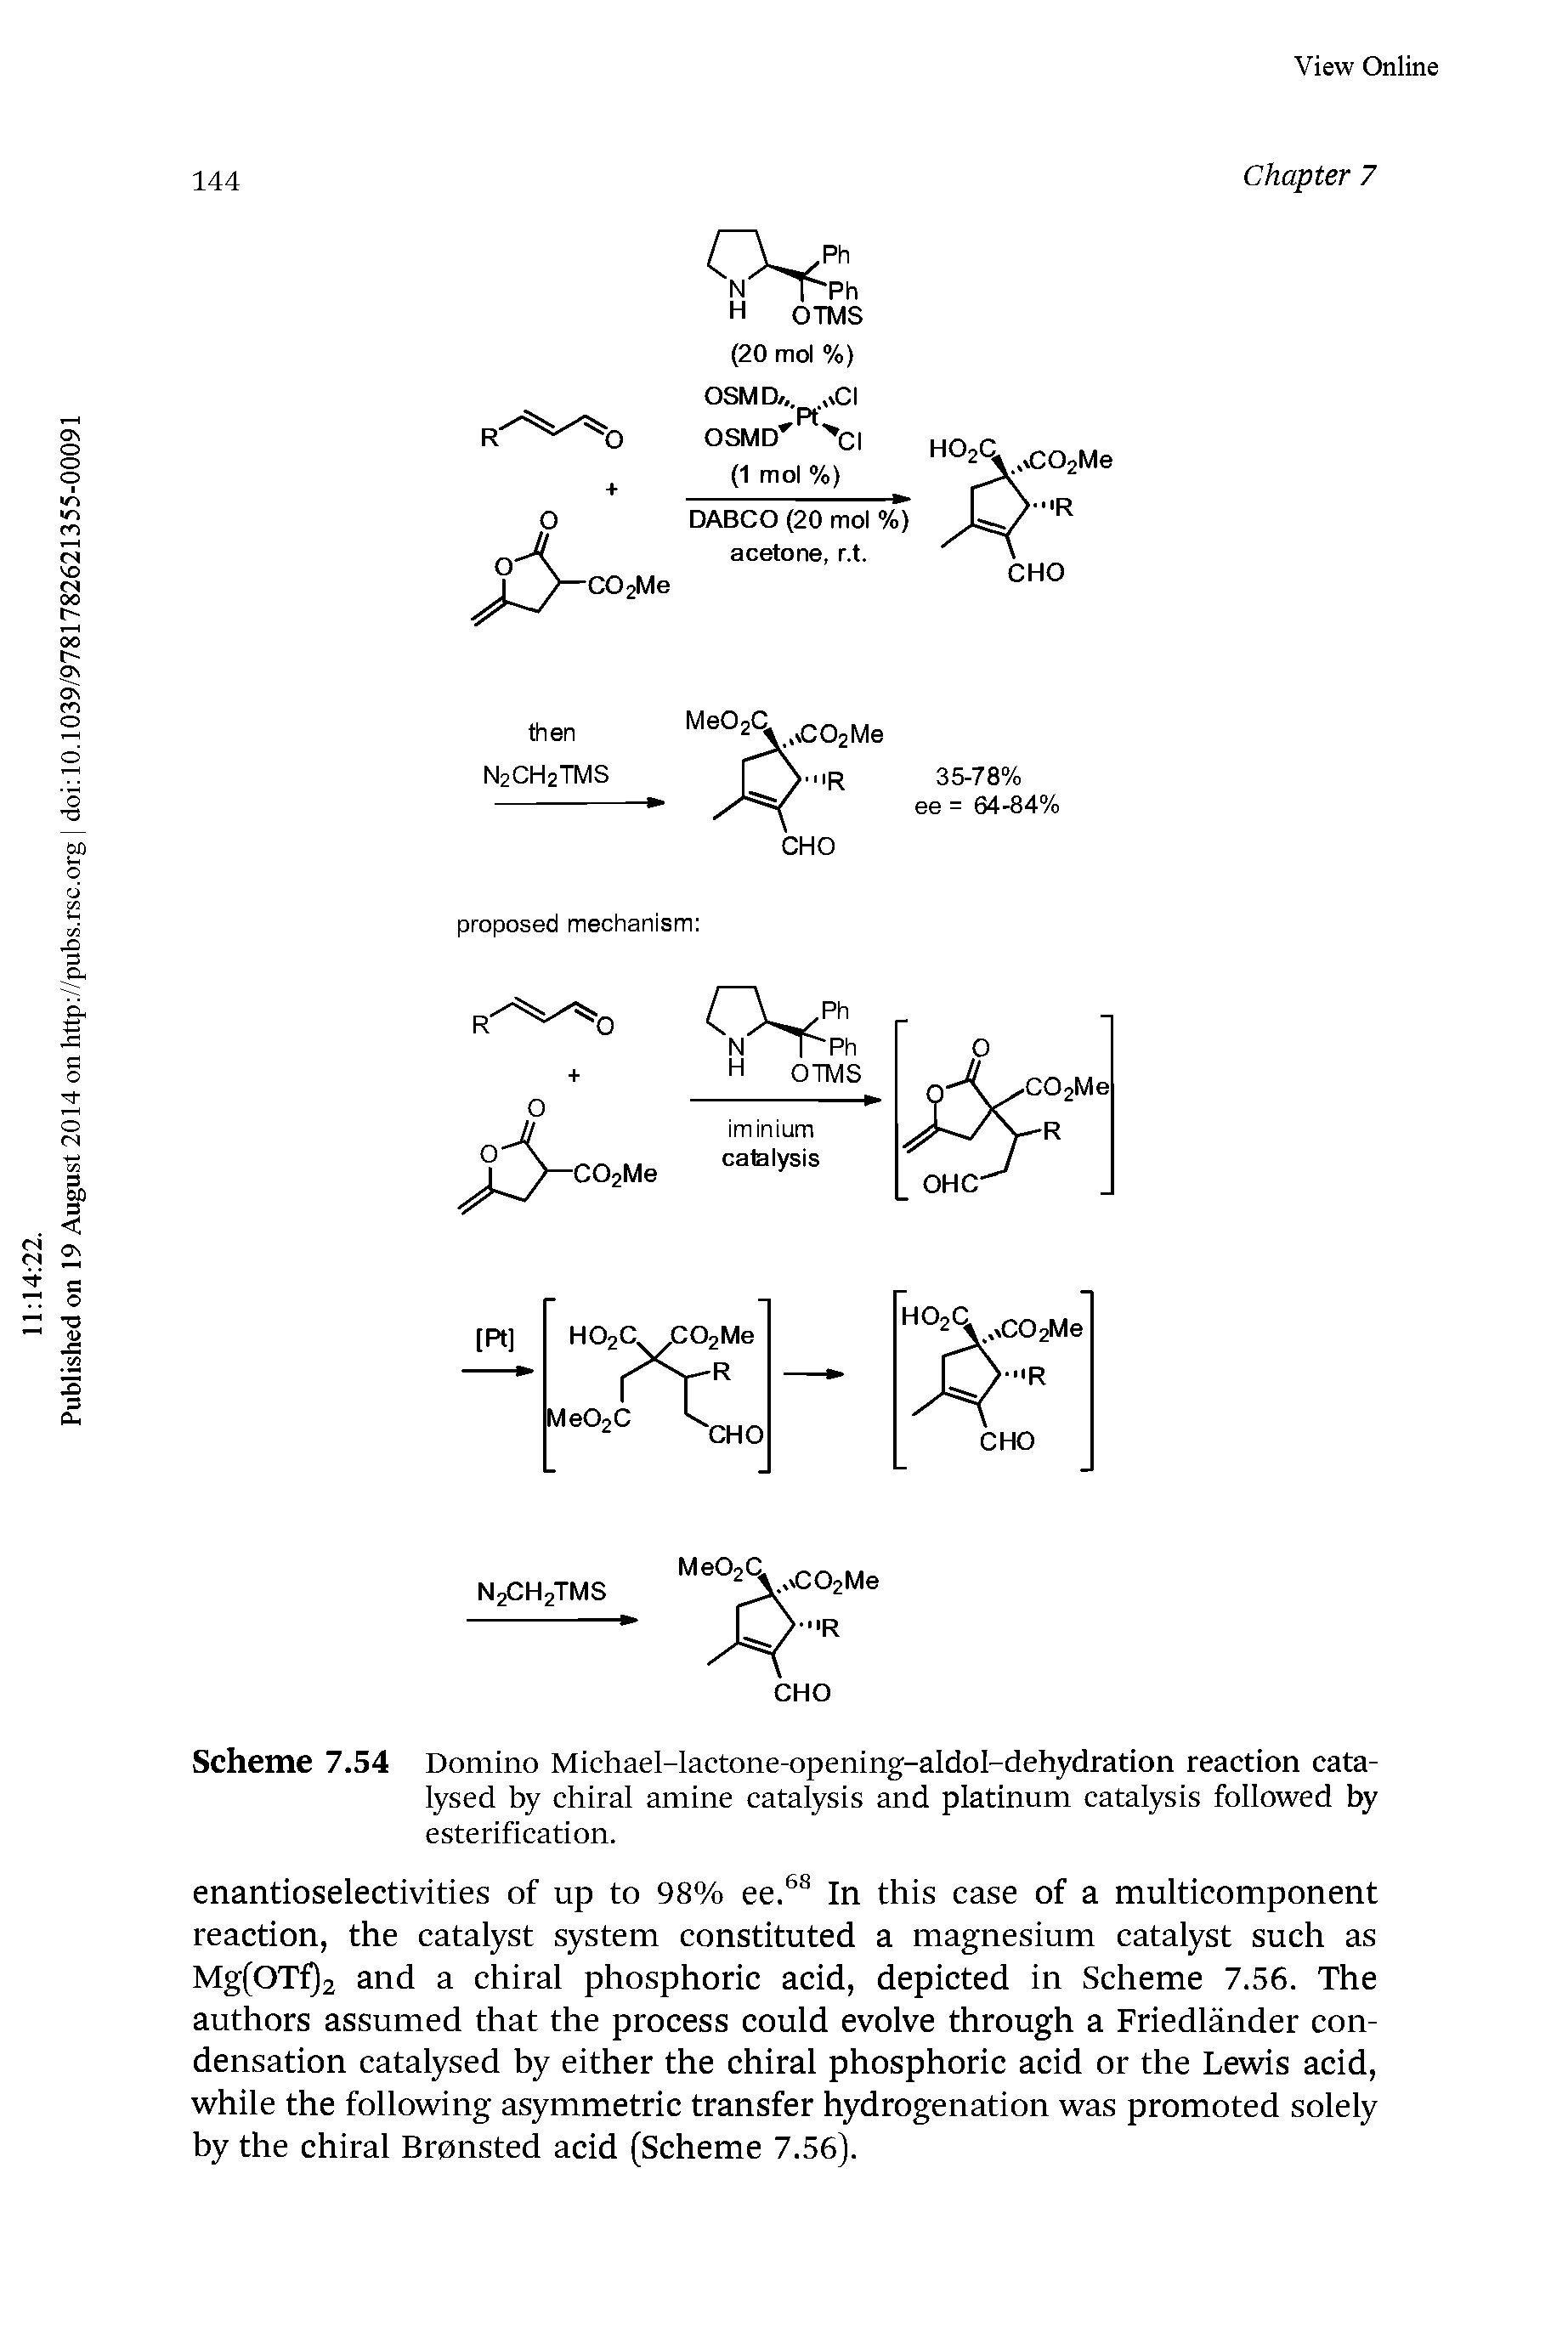 Scheme 7.54 Domino Michael-lactone-opening-aldol-dehydration reaction catalysed by chiral amine catalysis and platinum catalysis followed by esterification.